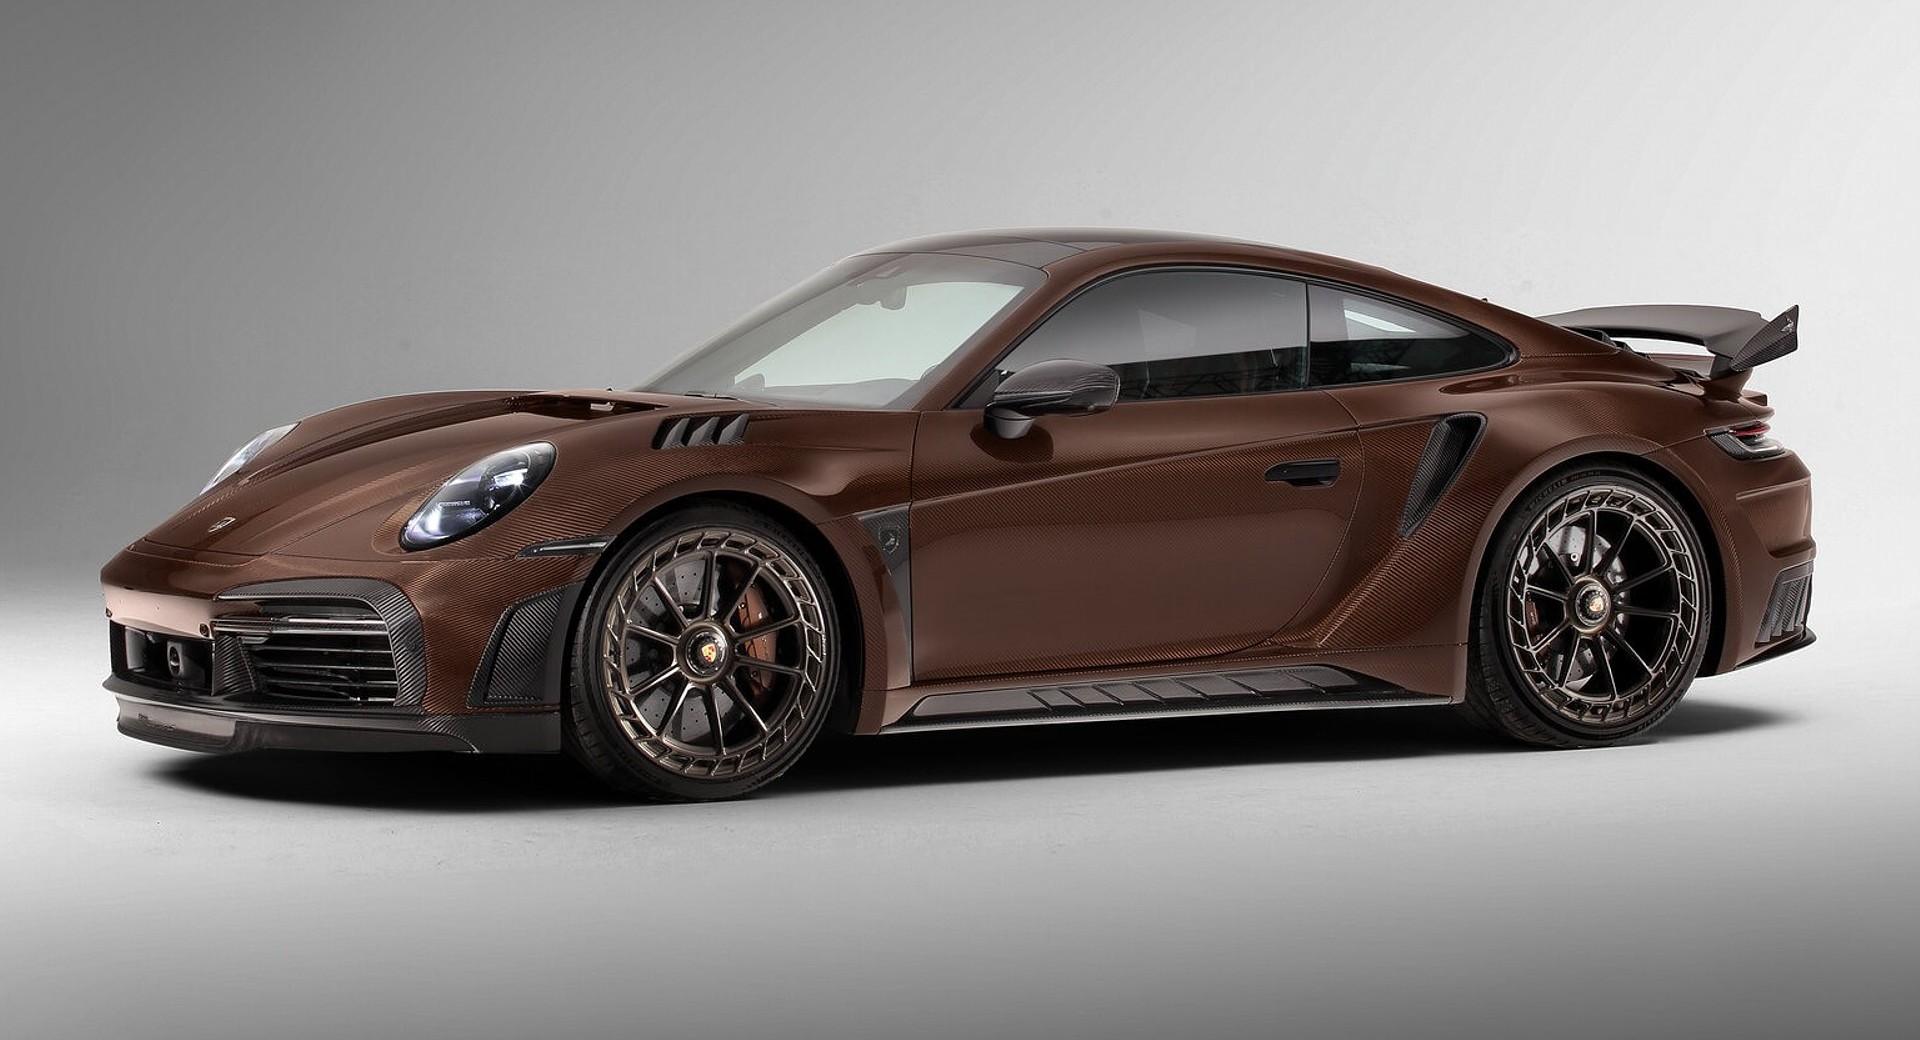 TopCar Dresses Their Tuned Porsche 911 Turbo S In Brown Carbon